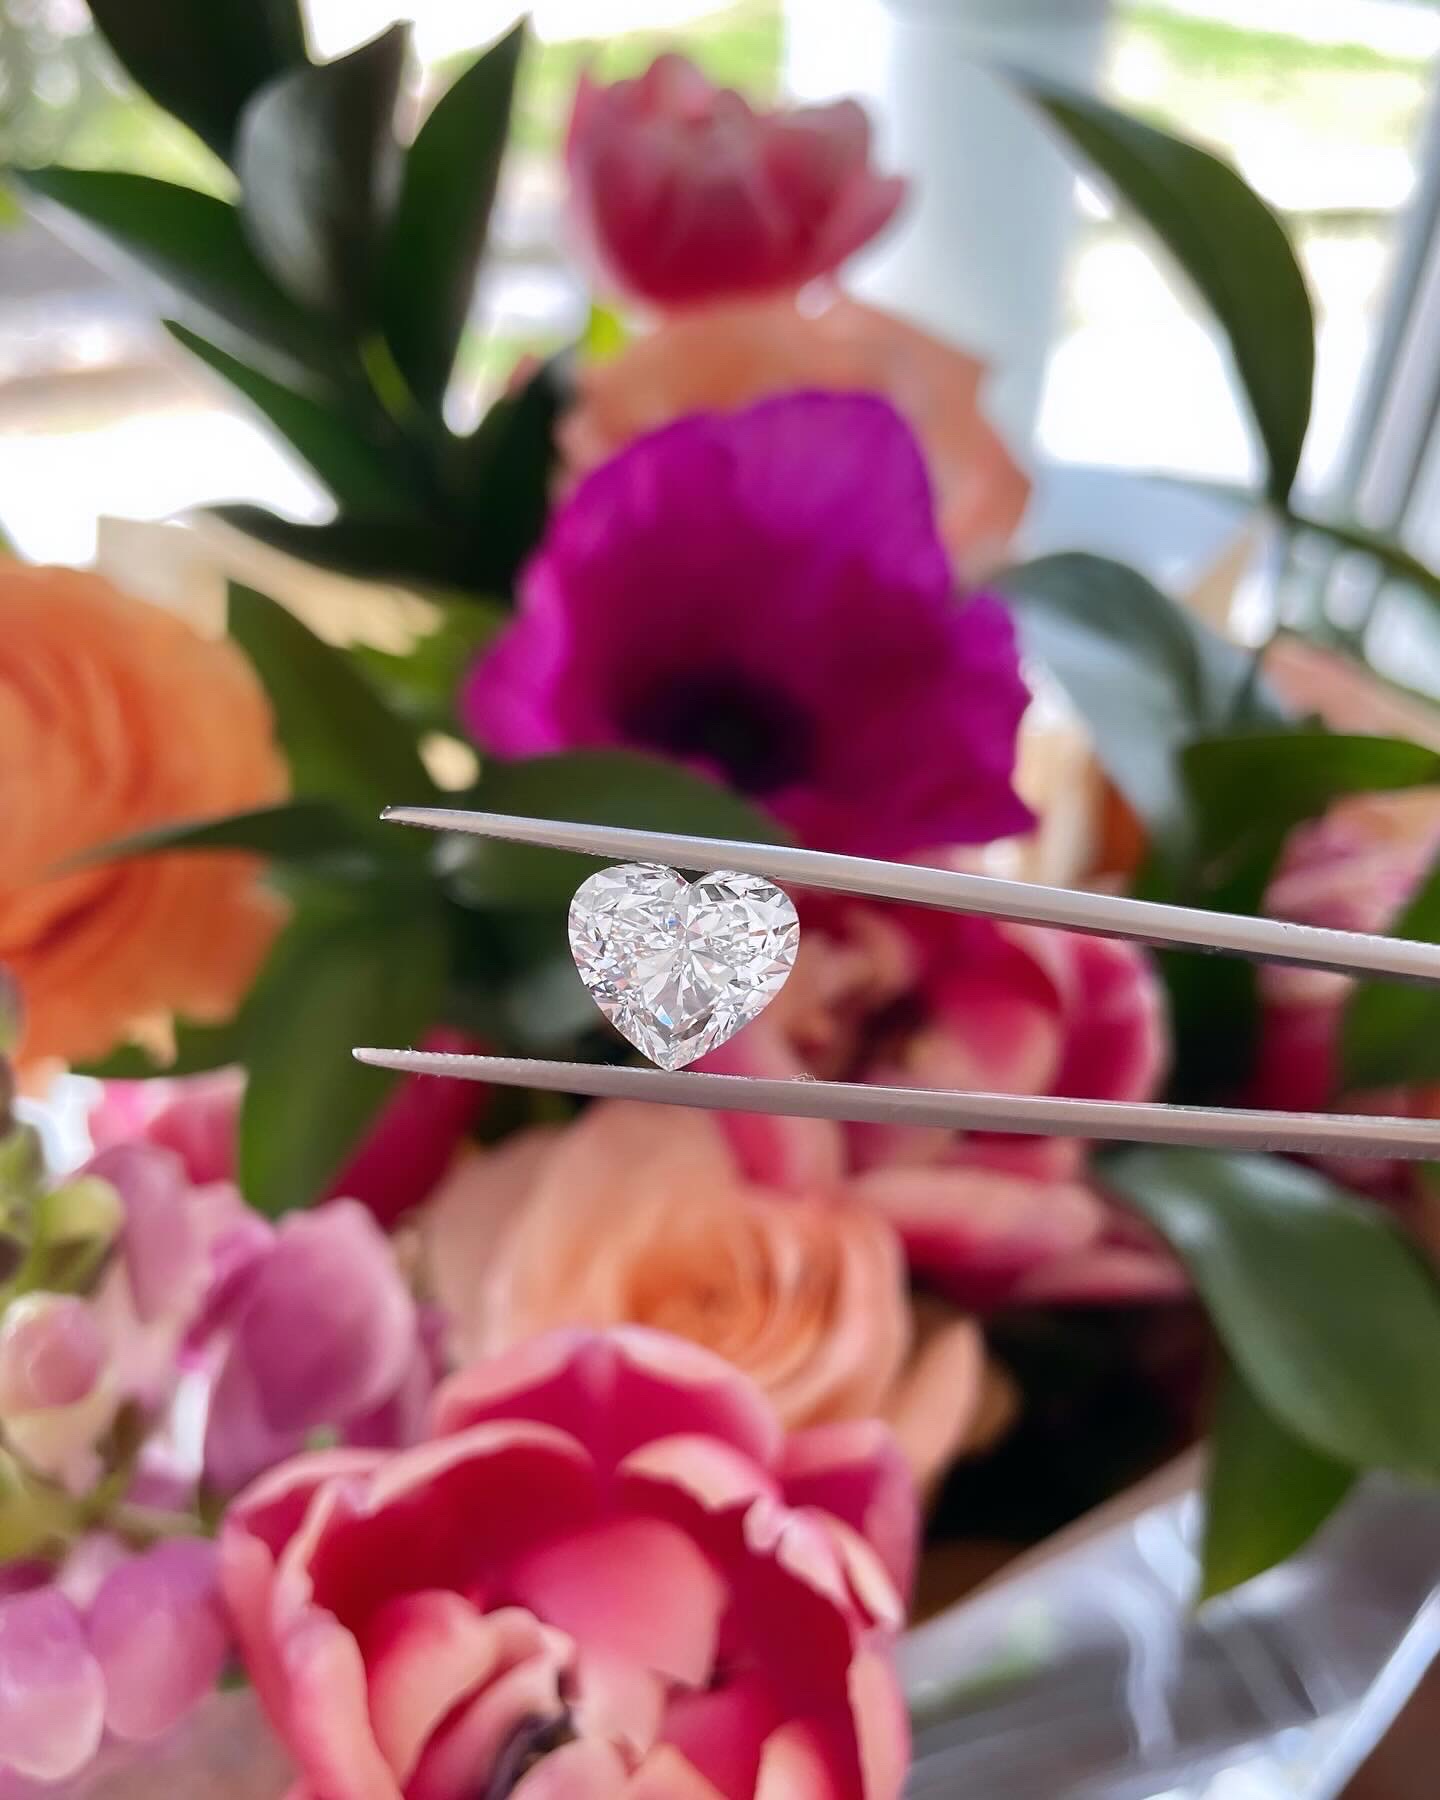 All You Need to Know About Heart Shape Diamonds